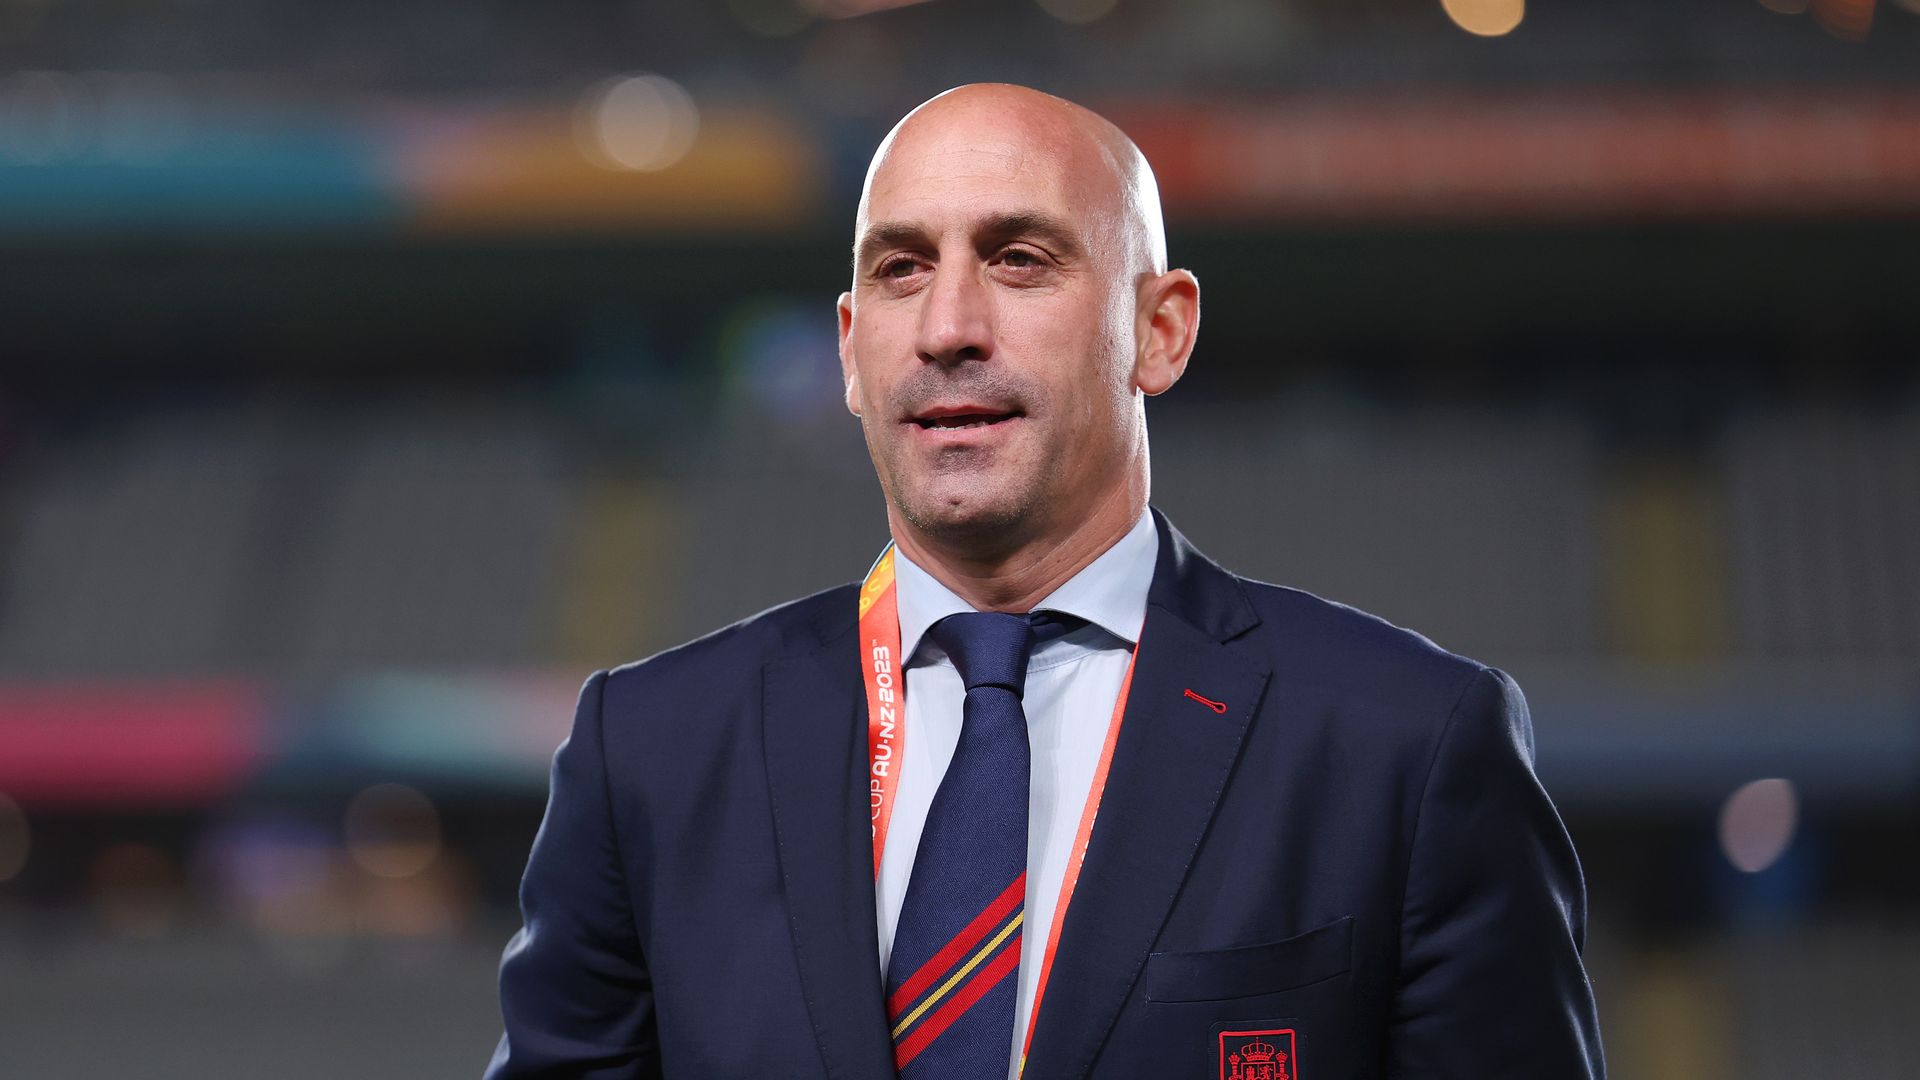 Luis Rubiales, President of the Royal Spanish Football Federation looks on prior to the FIFA Women's World Cup Australia & New Zealand 2023 Semi Final match between Spain and Sweden at Eden Park on August 15, 2023 in Auckland / Tāmaki Makaurau, New Zealand.